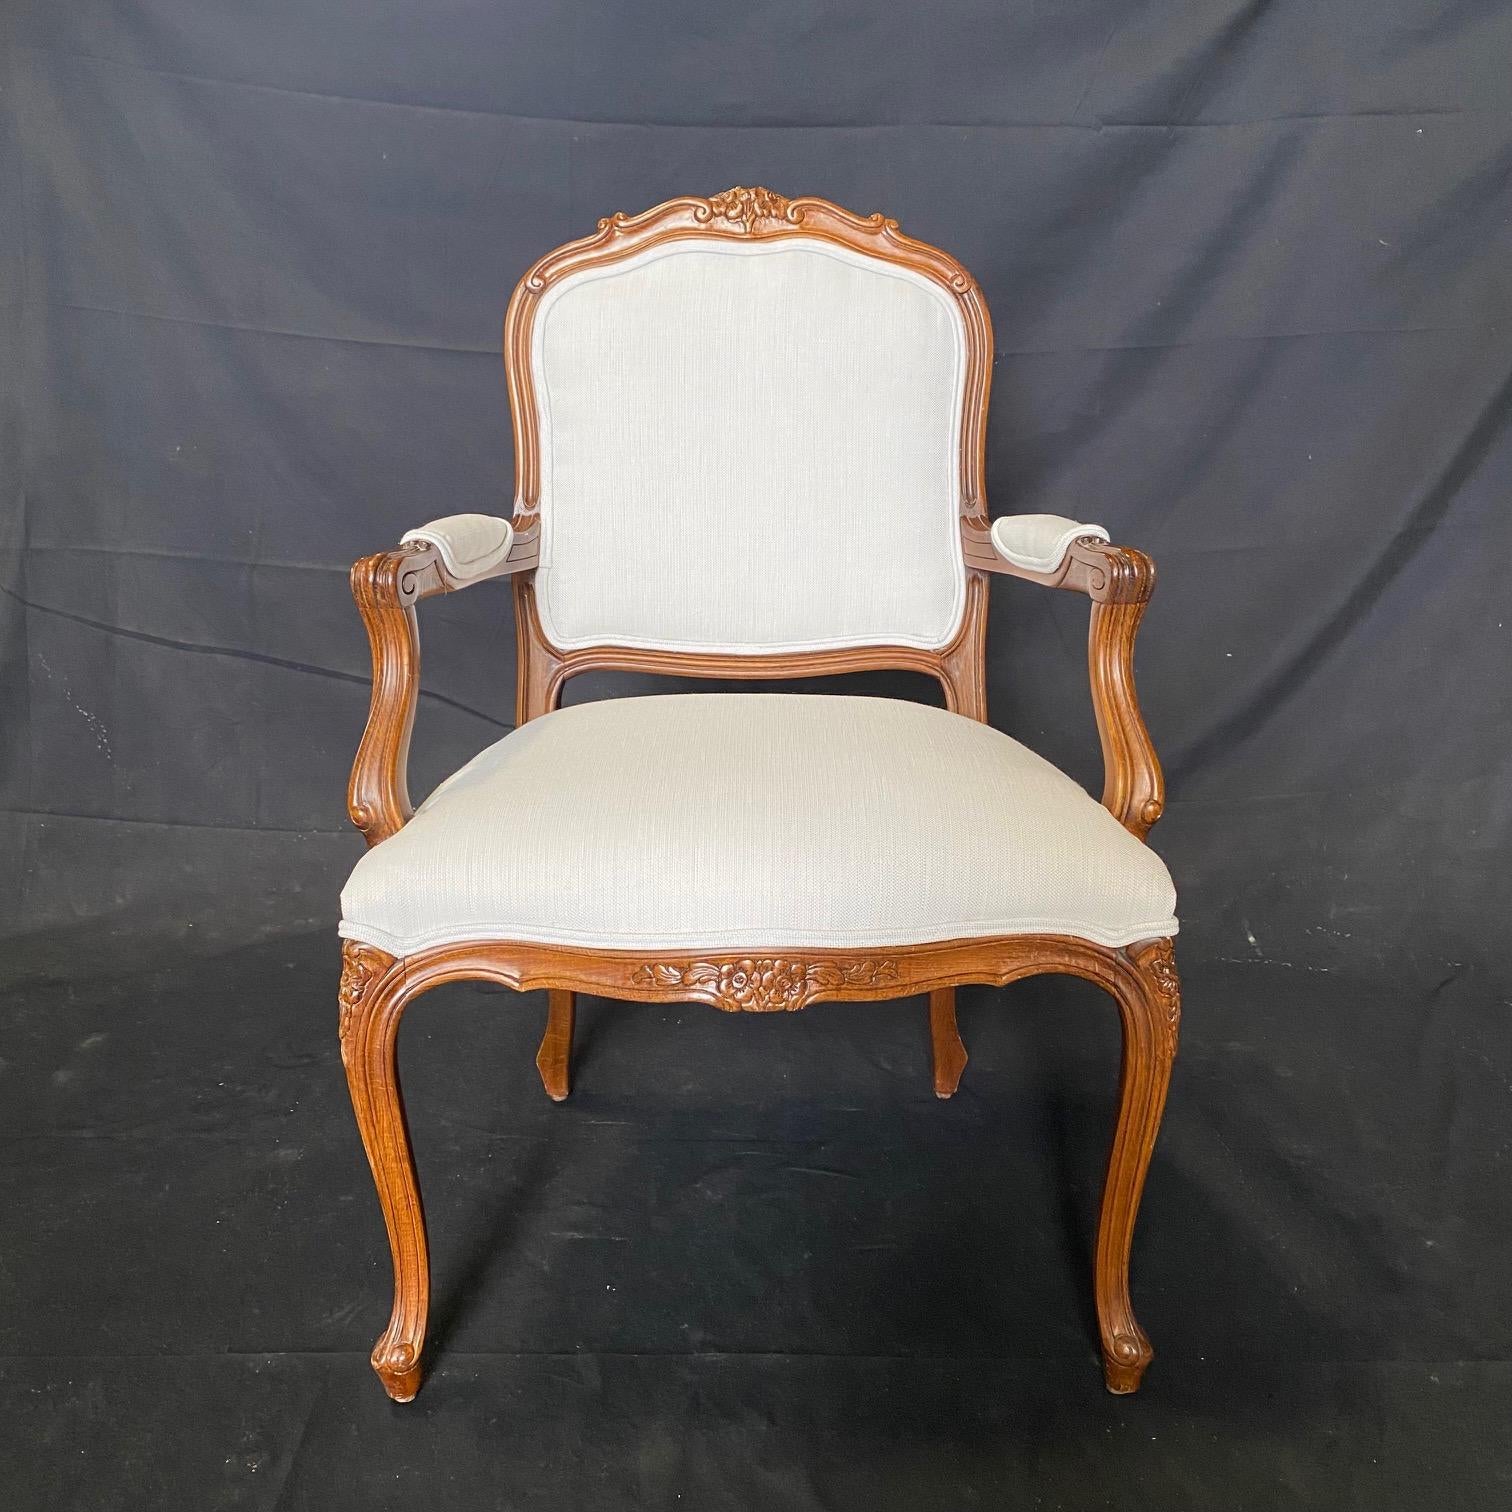 Pair of French Louis XV style walnut carved open armchairs with a lovely shaped back and newly upholstered seat, arms and backs. Can also be used as end accent dining chairs or in a bedroom or sitting area. Will add elegance to any room.  arm height